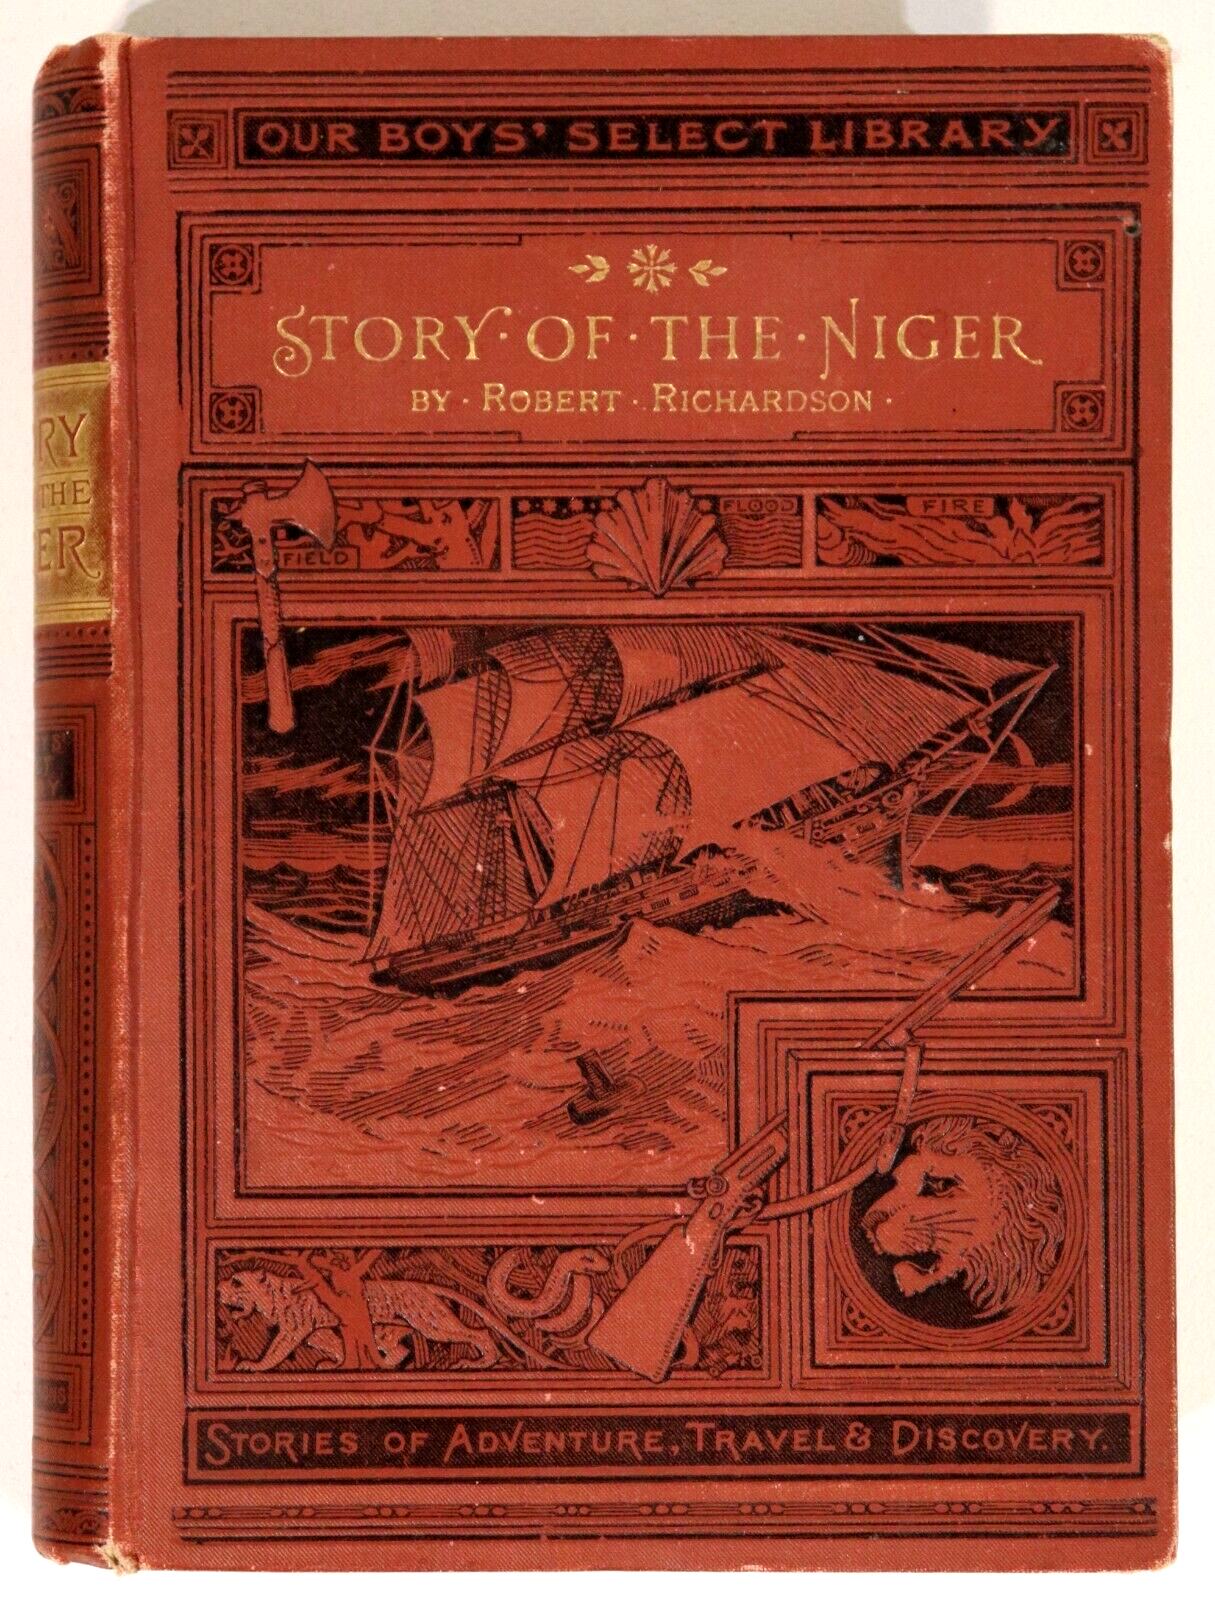 Story Of The Niger by Robert Richardson - 1898 - AntiqueAfrican History Book